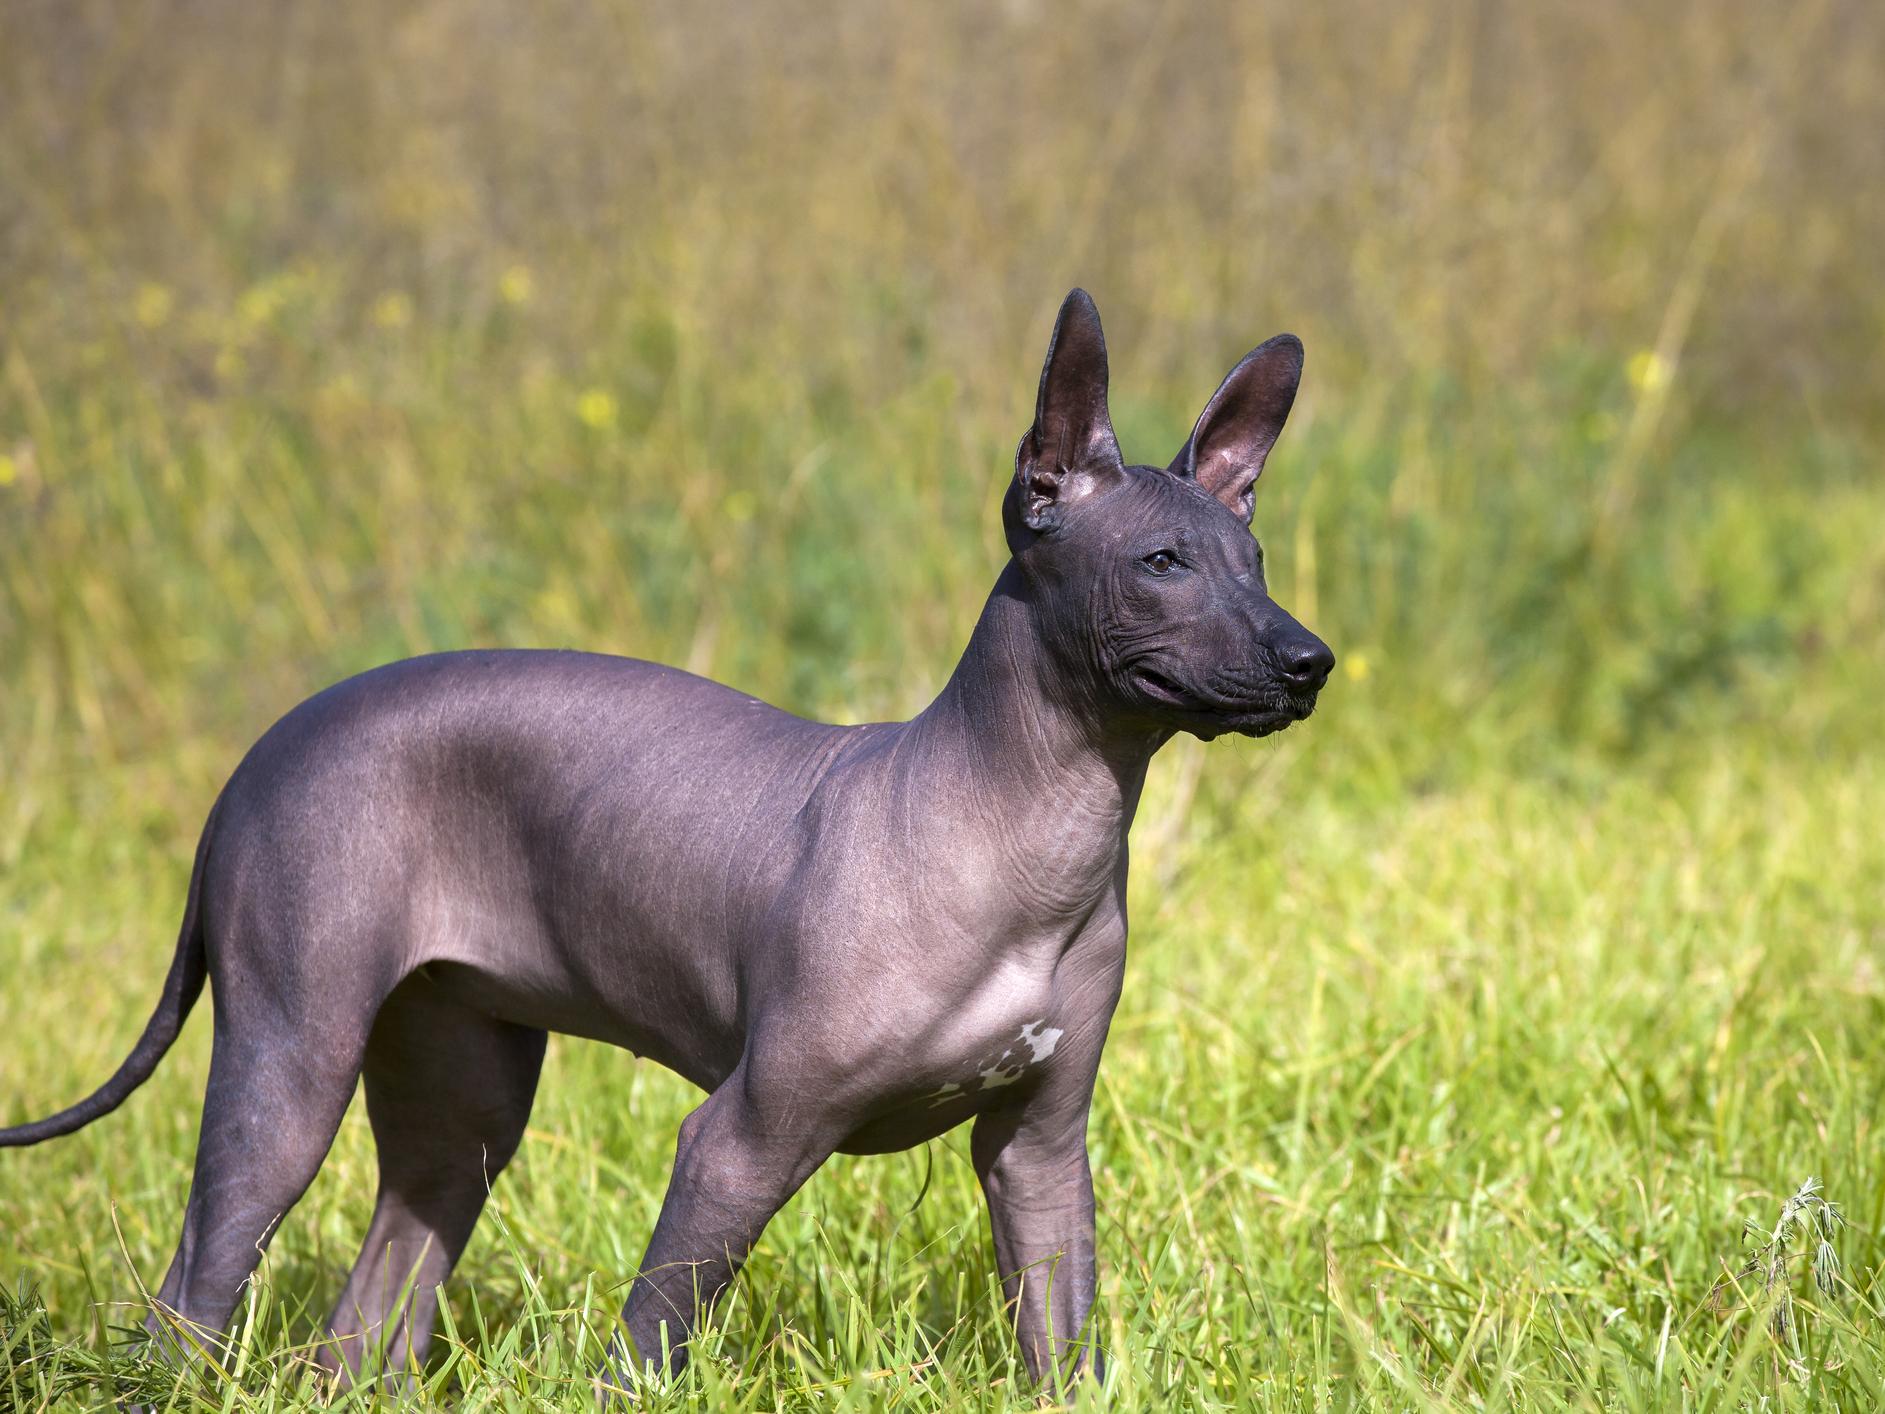 Mexican hairless dogs, or Xoloitzcuintlis, are some of the few known to have some genetic similarities with ancient 'pre-contact' breeds